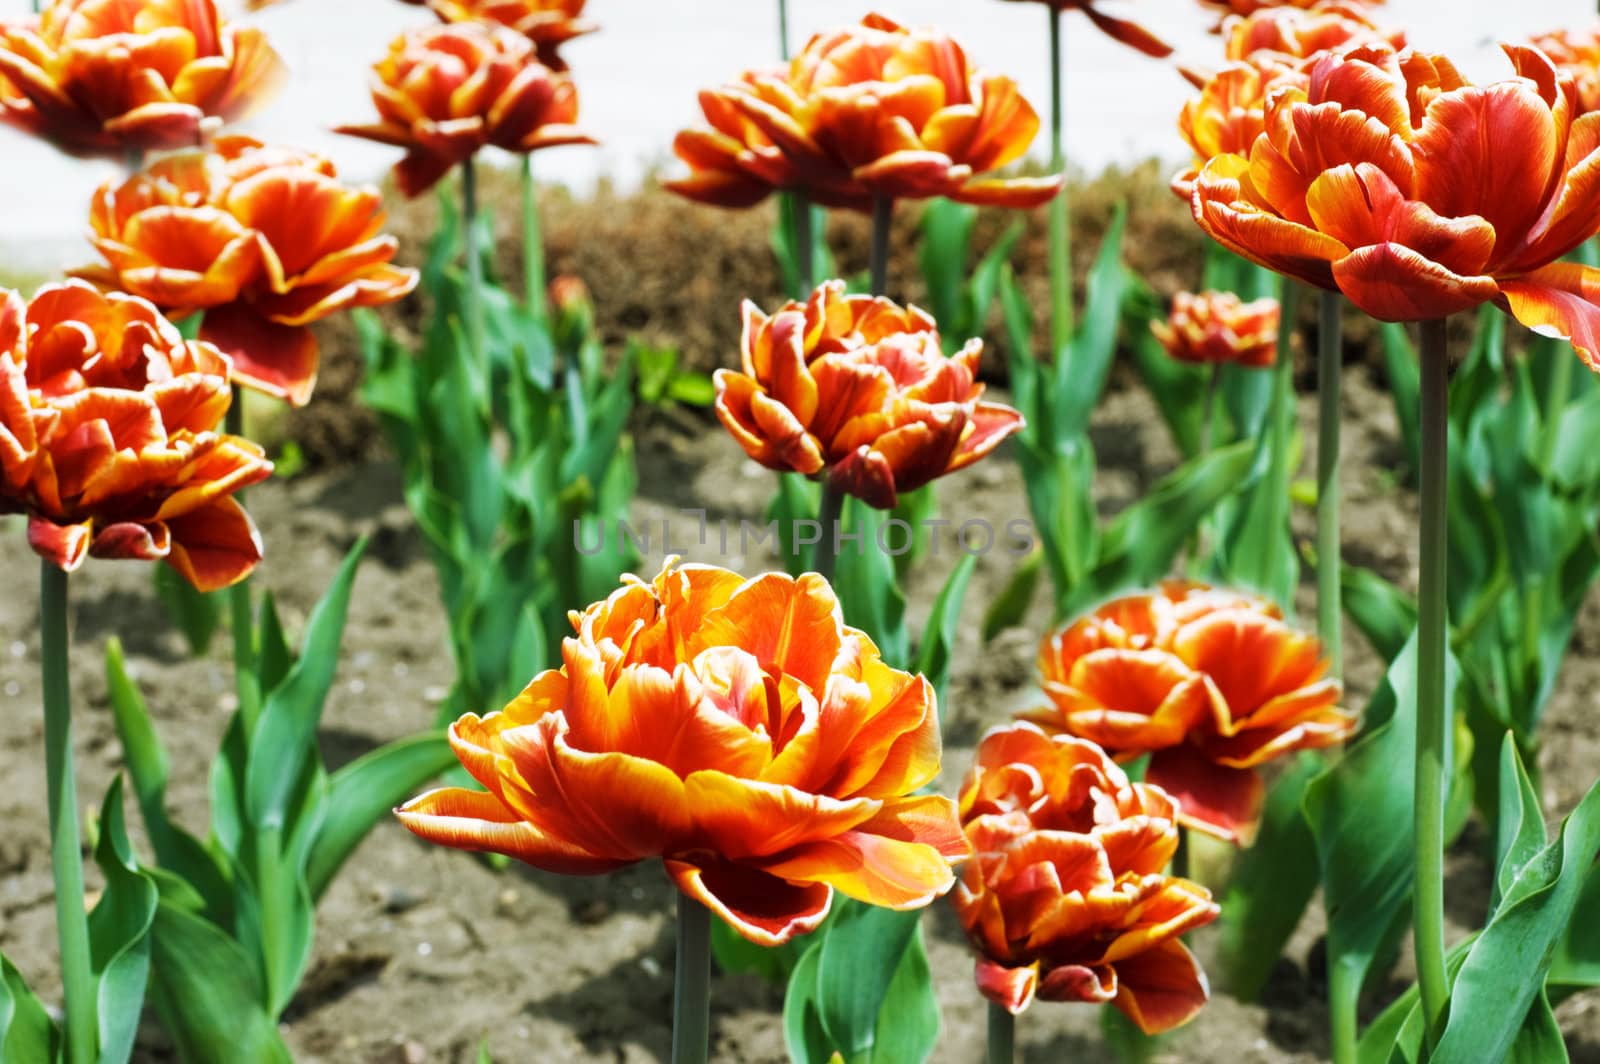 Red tulips growing in the flowerbed